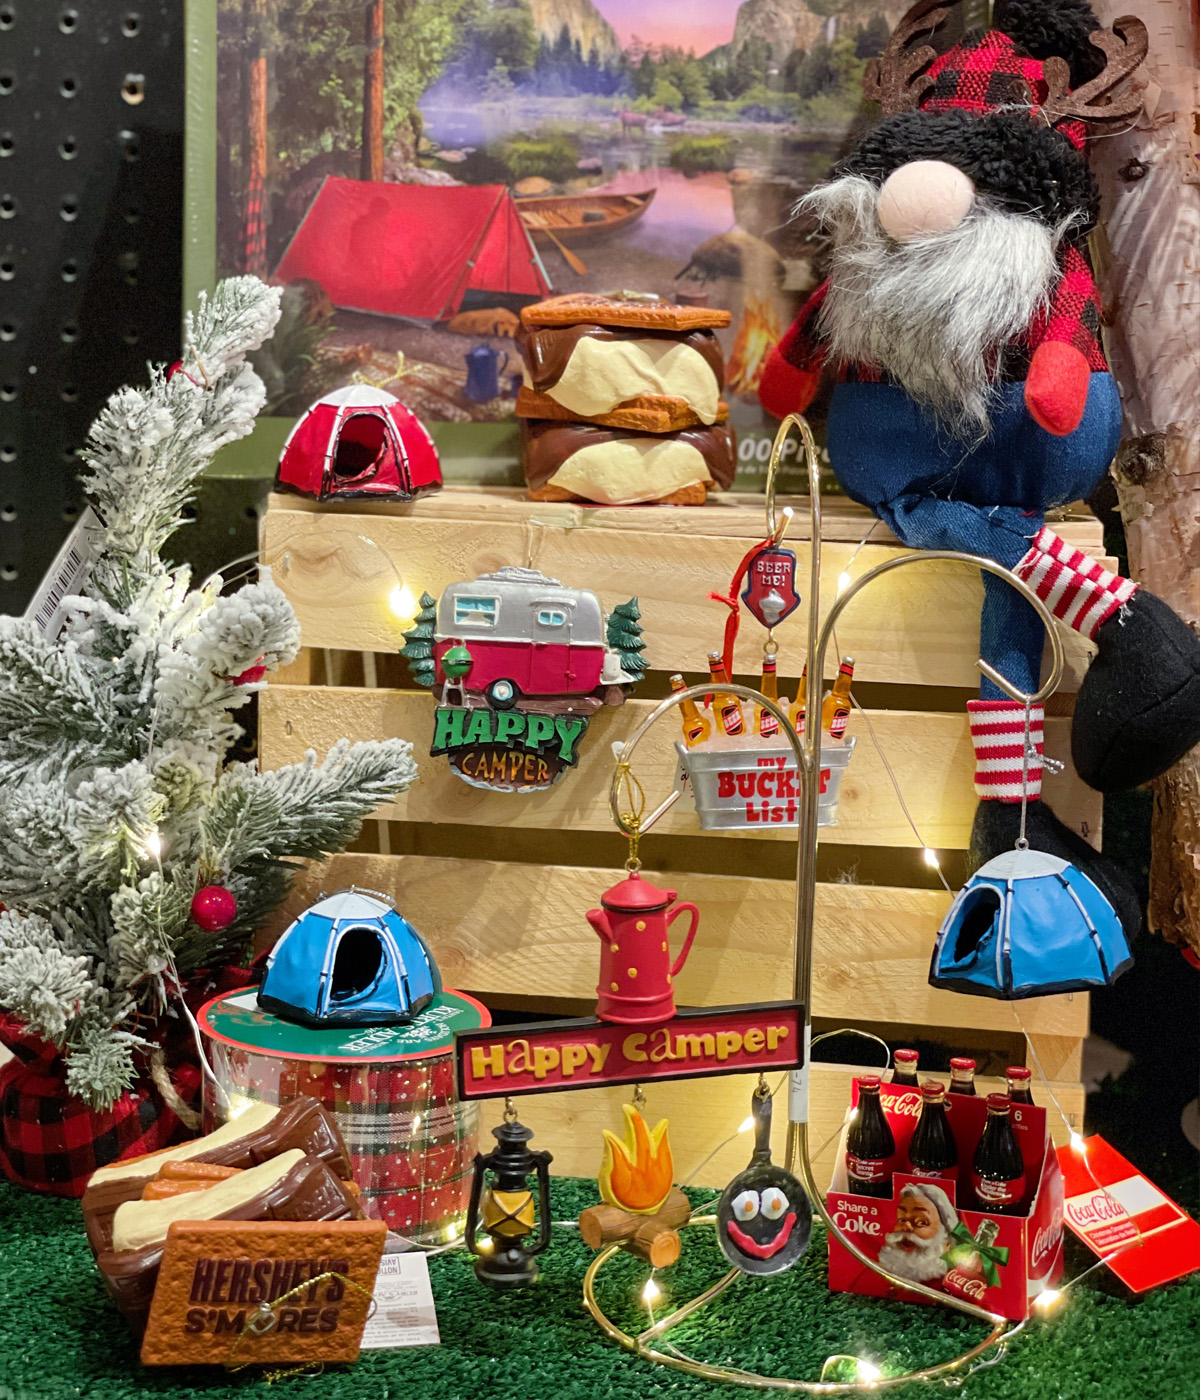 For all of the camping enthusiasts, we have a variety of camping ornaments for your Christmas tree!